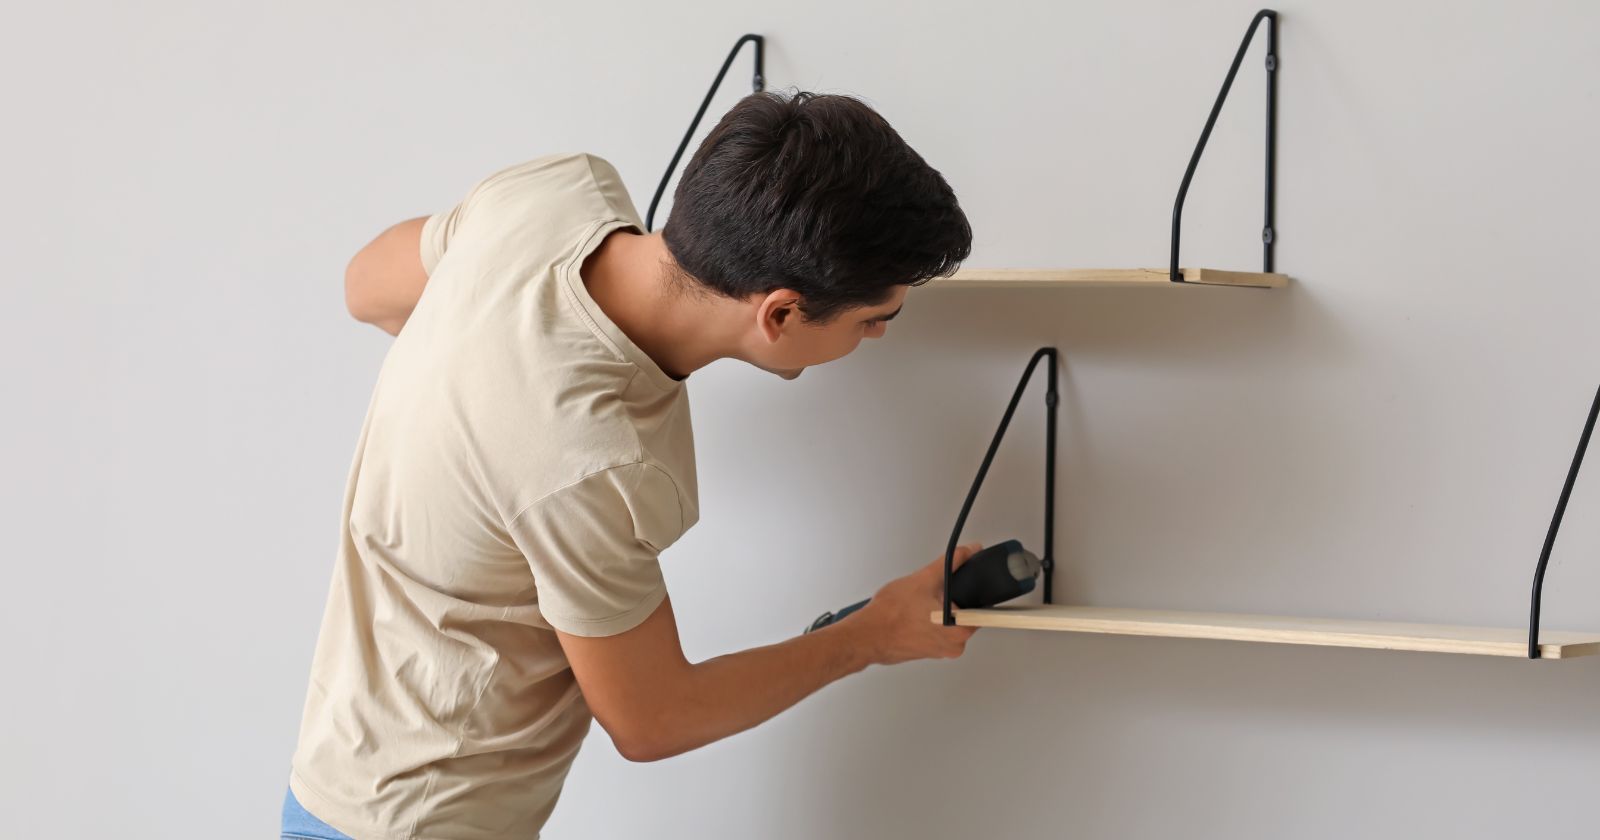 Installing Shelves And Brackets With An Impact Driver